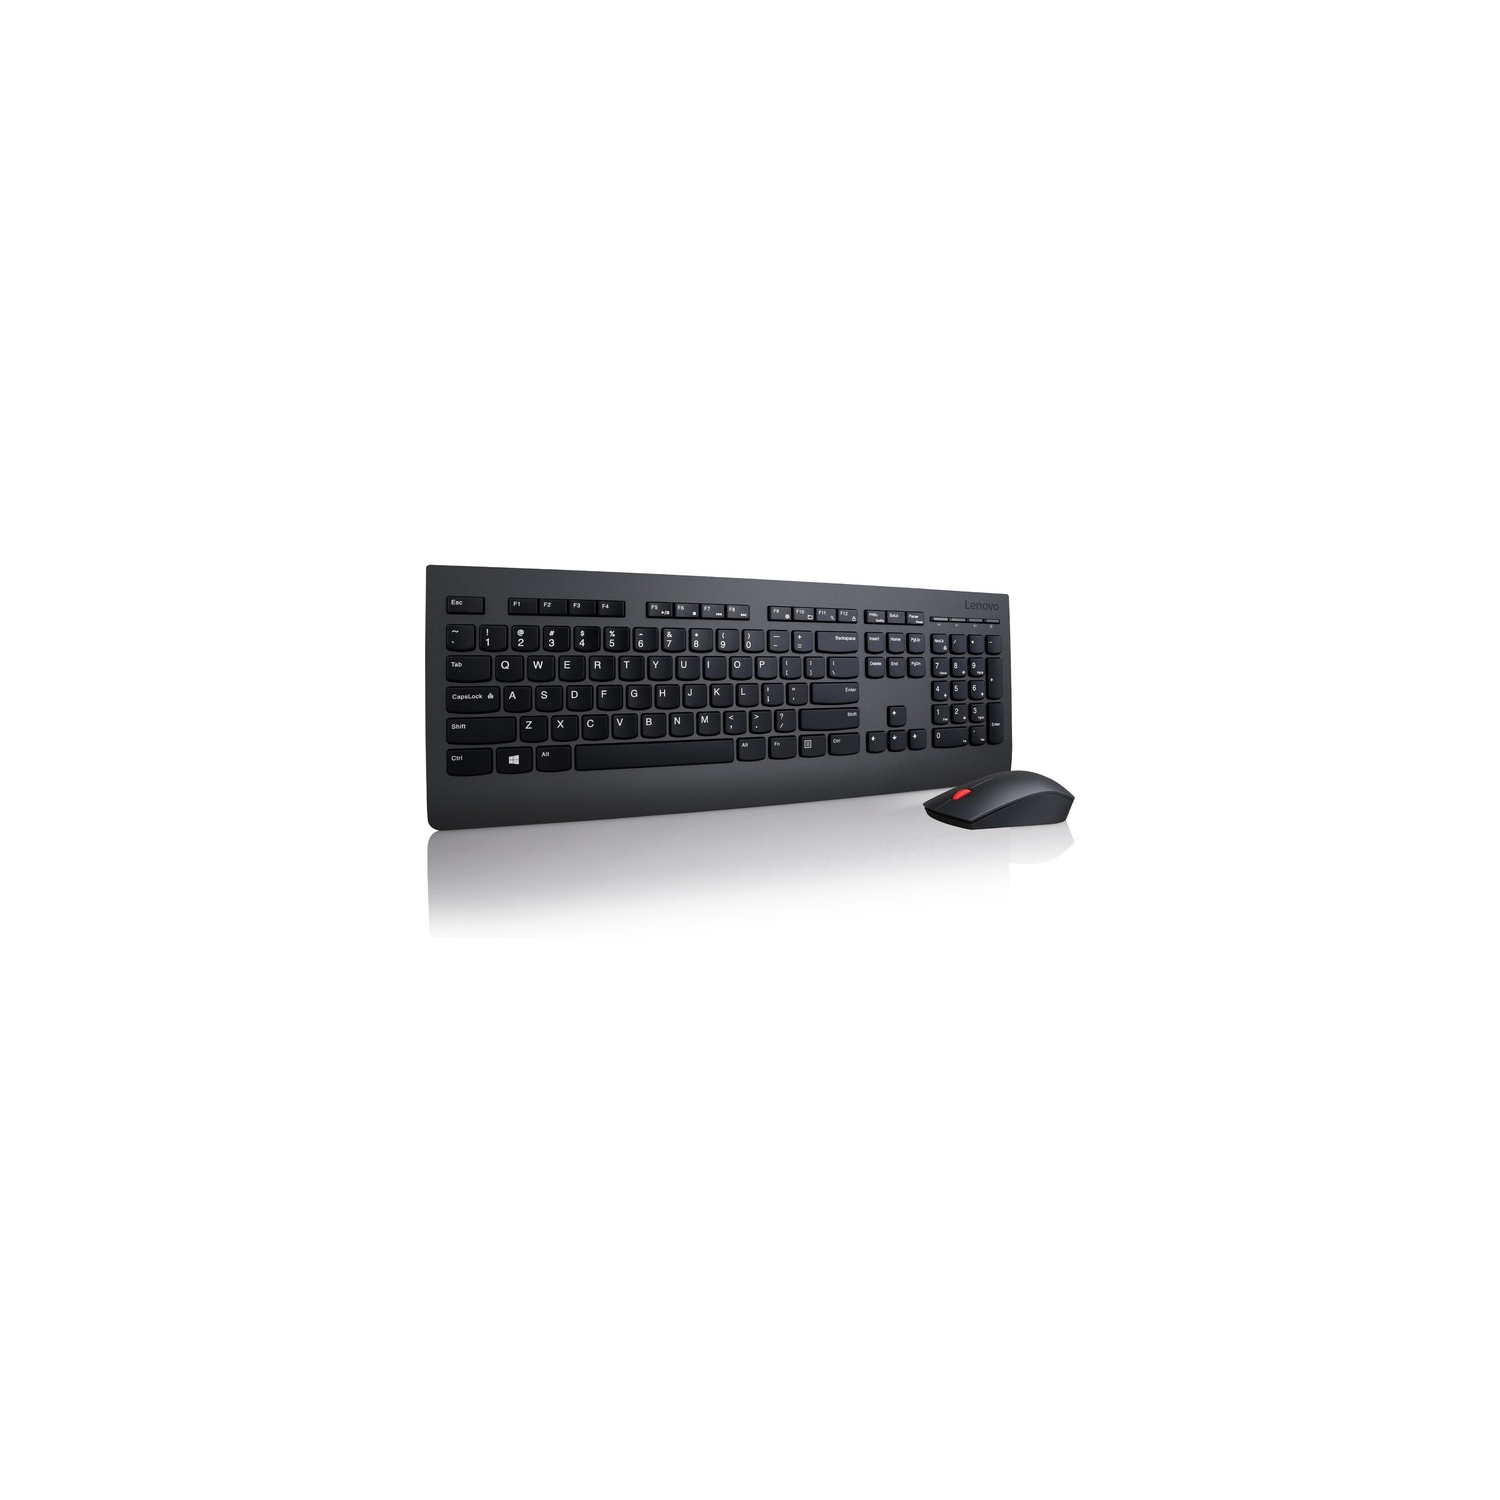 Lenovo Professional Wireless Keyboard and Mouse Combo - US English 4X30H56796